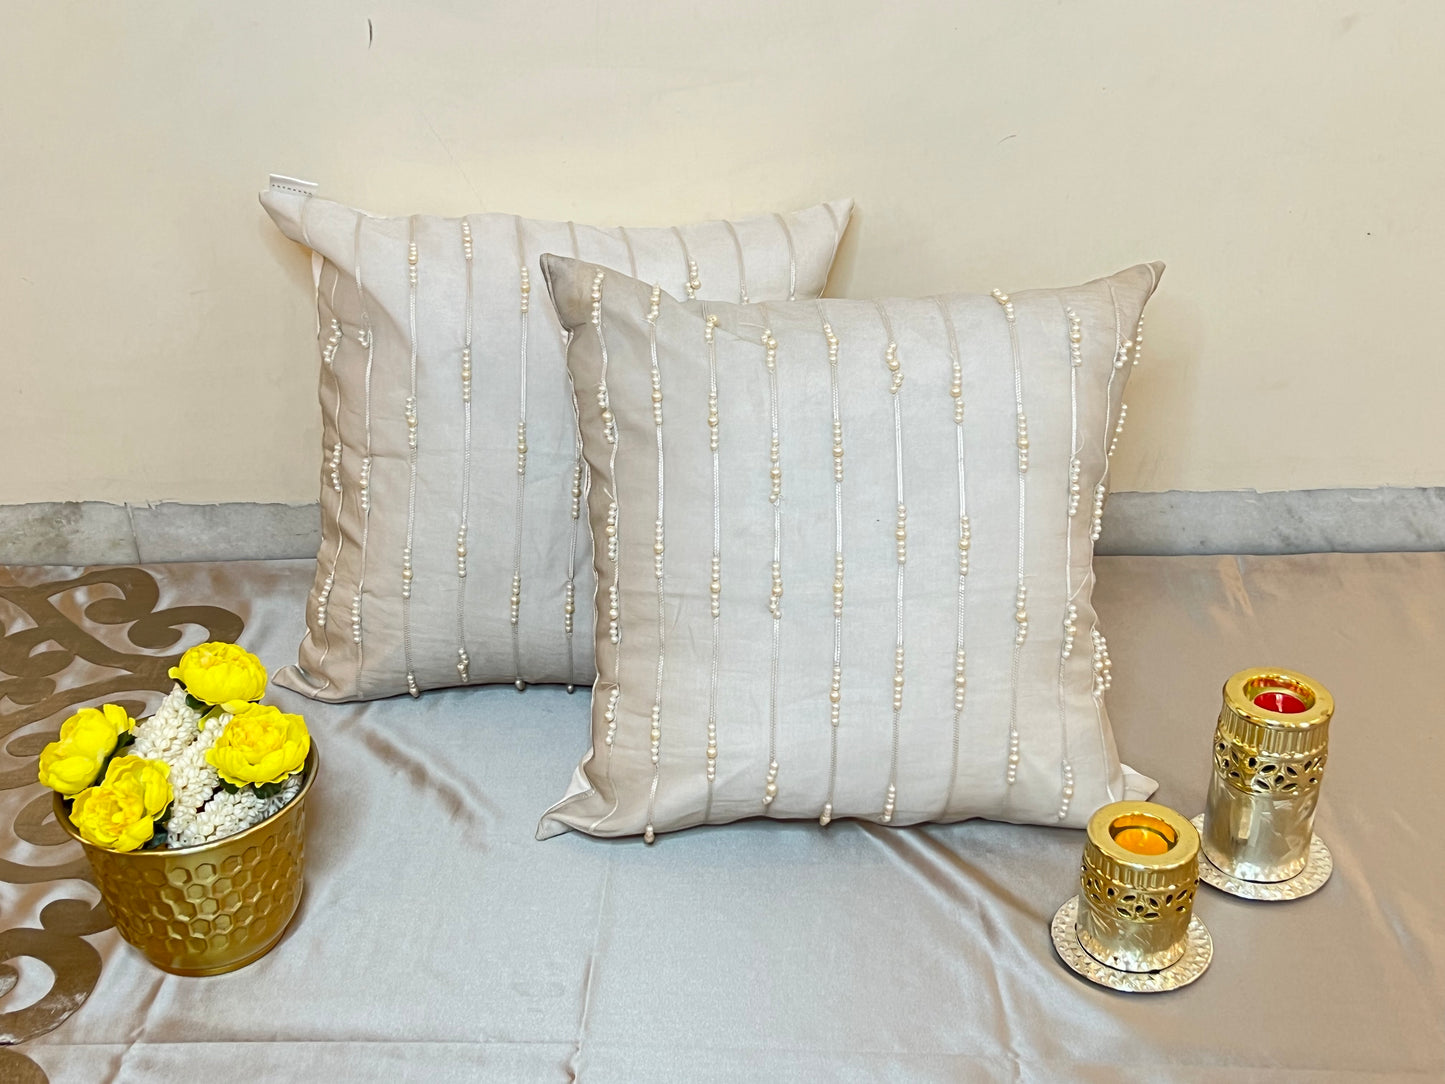 Gleam Cushion Cover Sets at Kamakhyaa by Aetherea. This item is 100% Cotton, Cushion covers, Hand Embroidered, Home, ivory, Pearl, Sheer, Upcycled